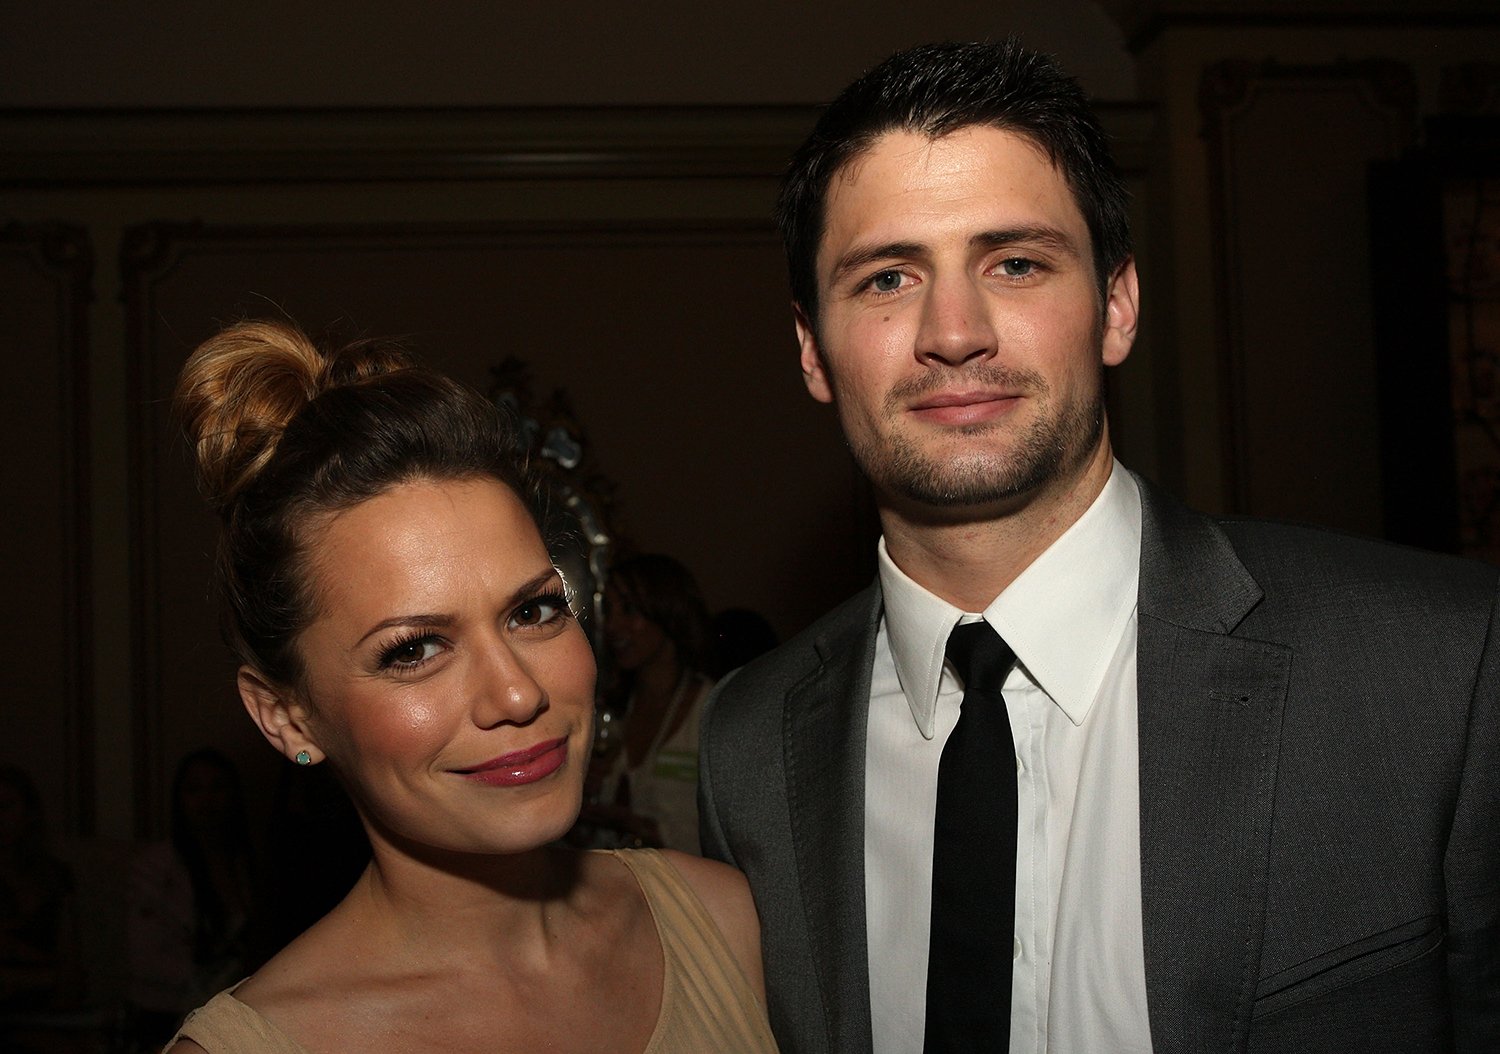 Bethany Joy Lenz and James Lafferty, who played Haley James and Nathan Scott on One Tree Hill.